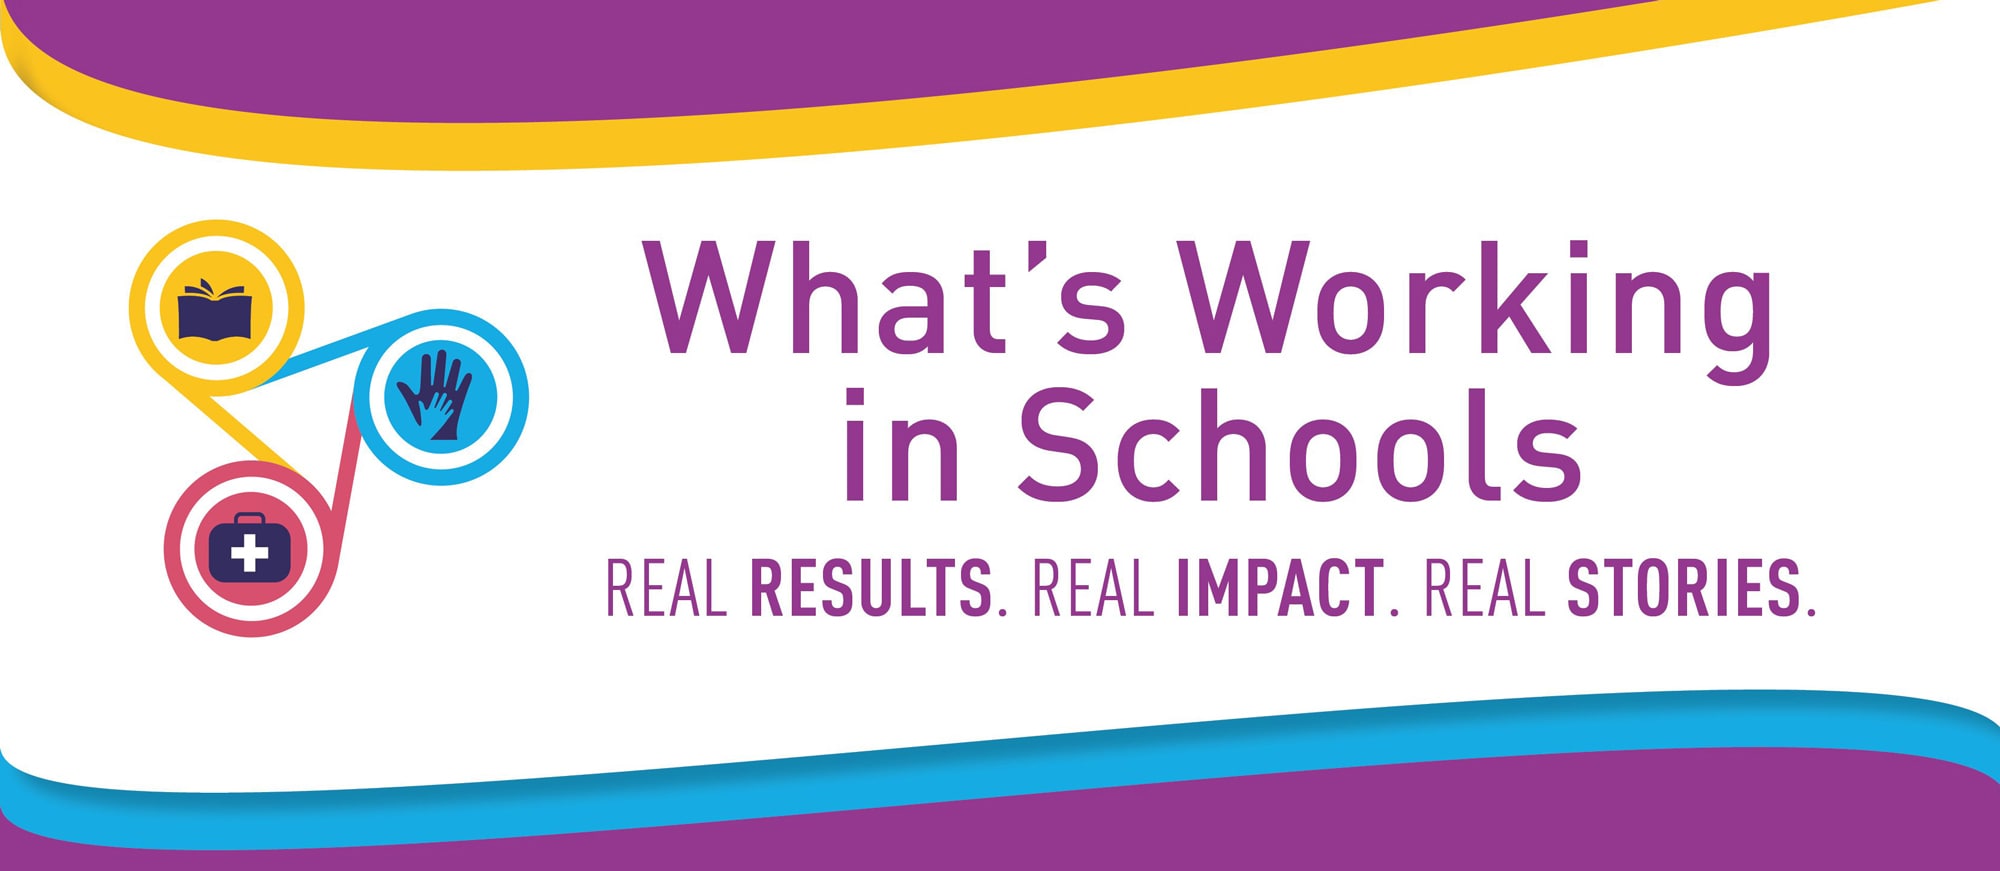 What's working in schools. Real results, real impact, real stories.